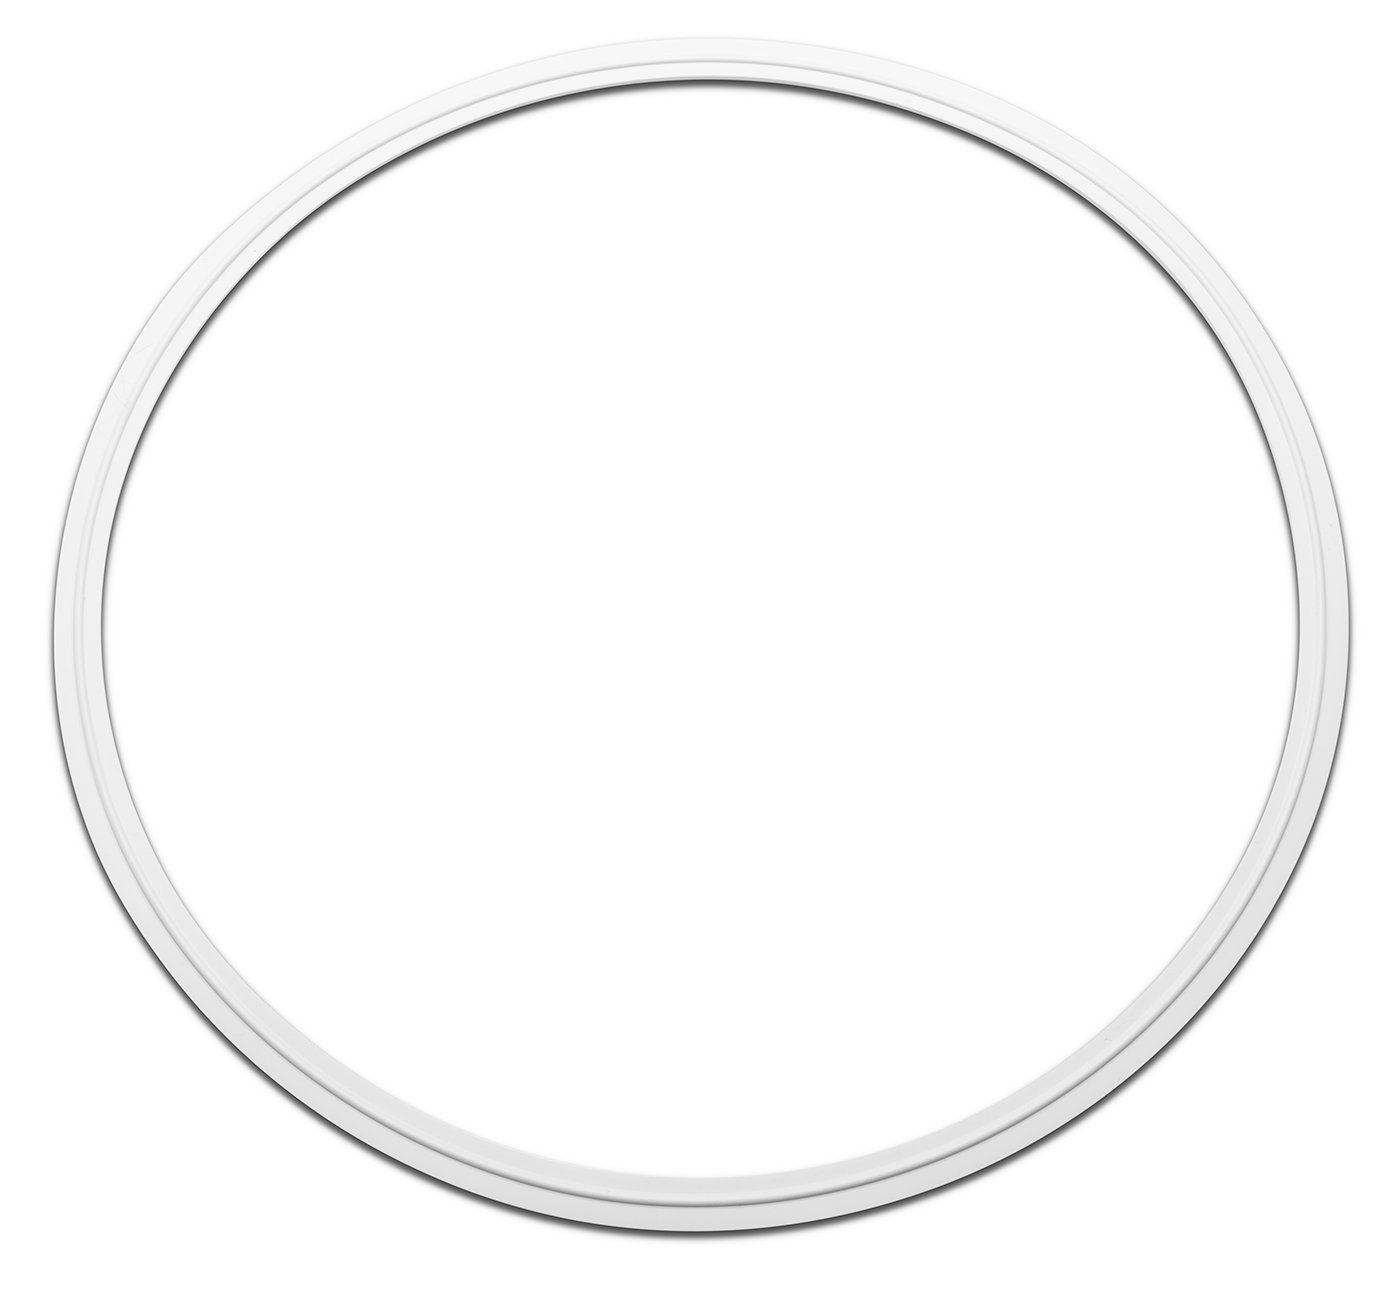 Silicone Tri-Clamp Gaskets Shop All Categories BVV 12-inch